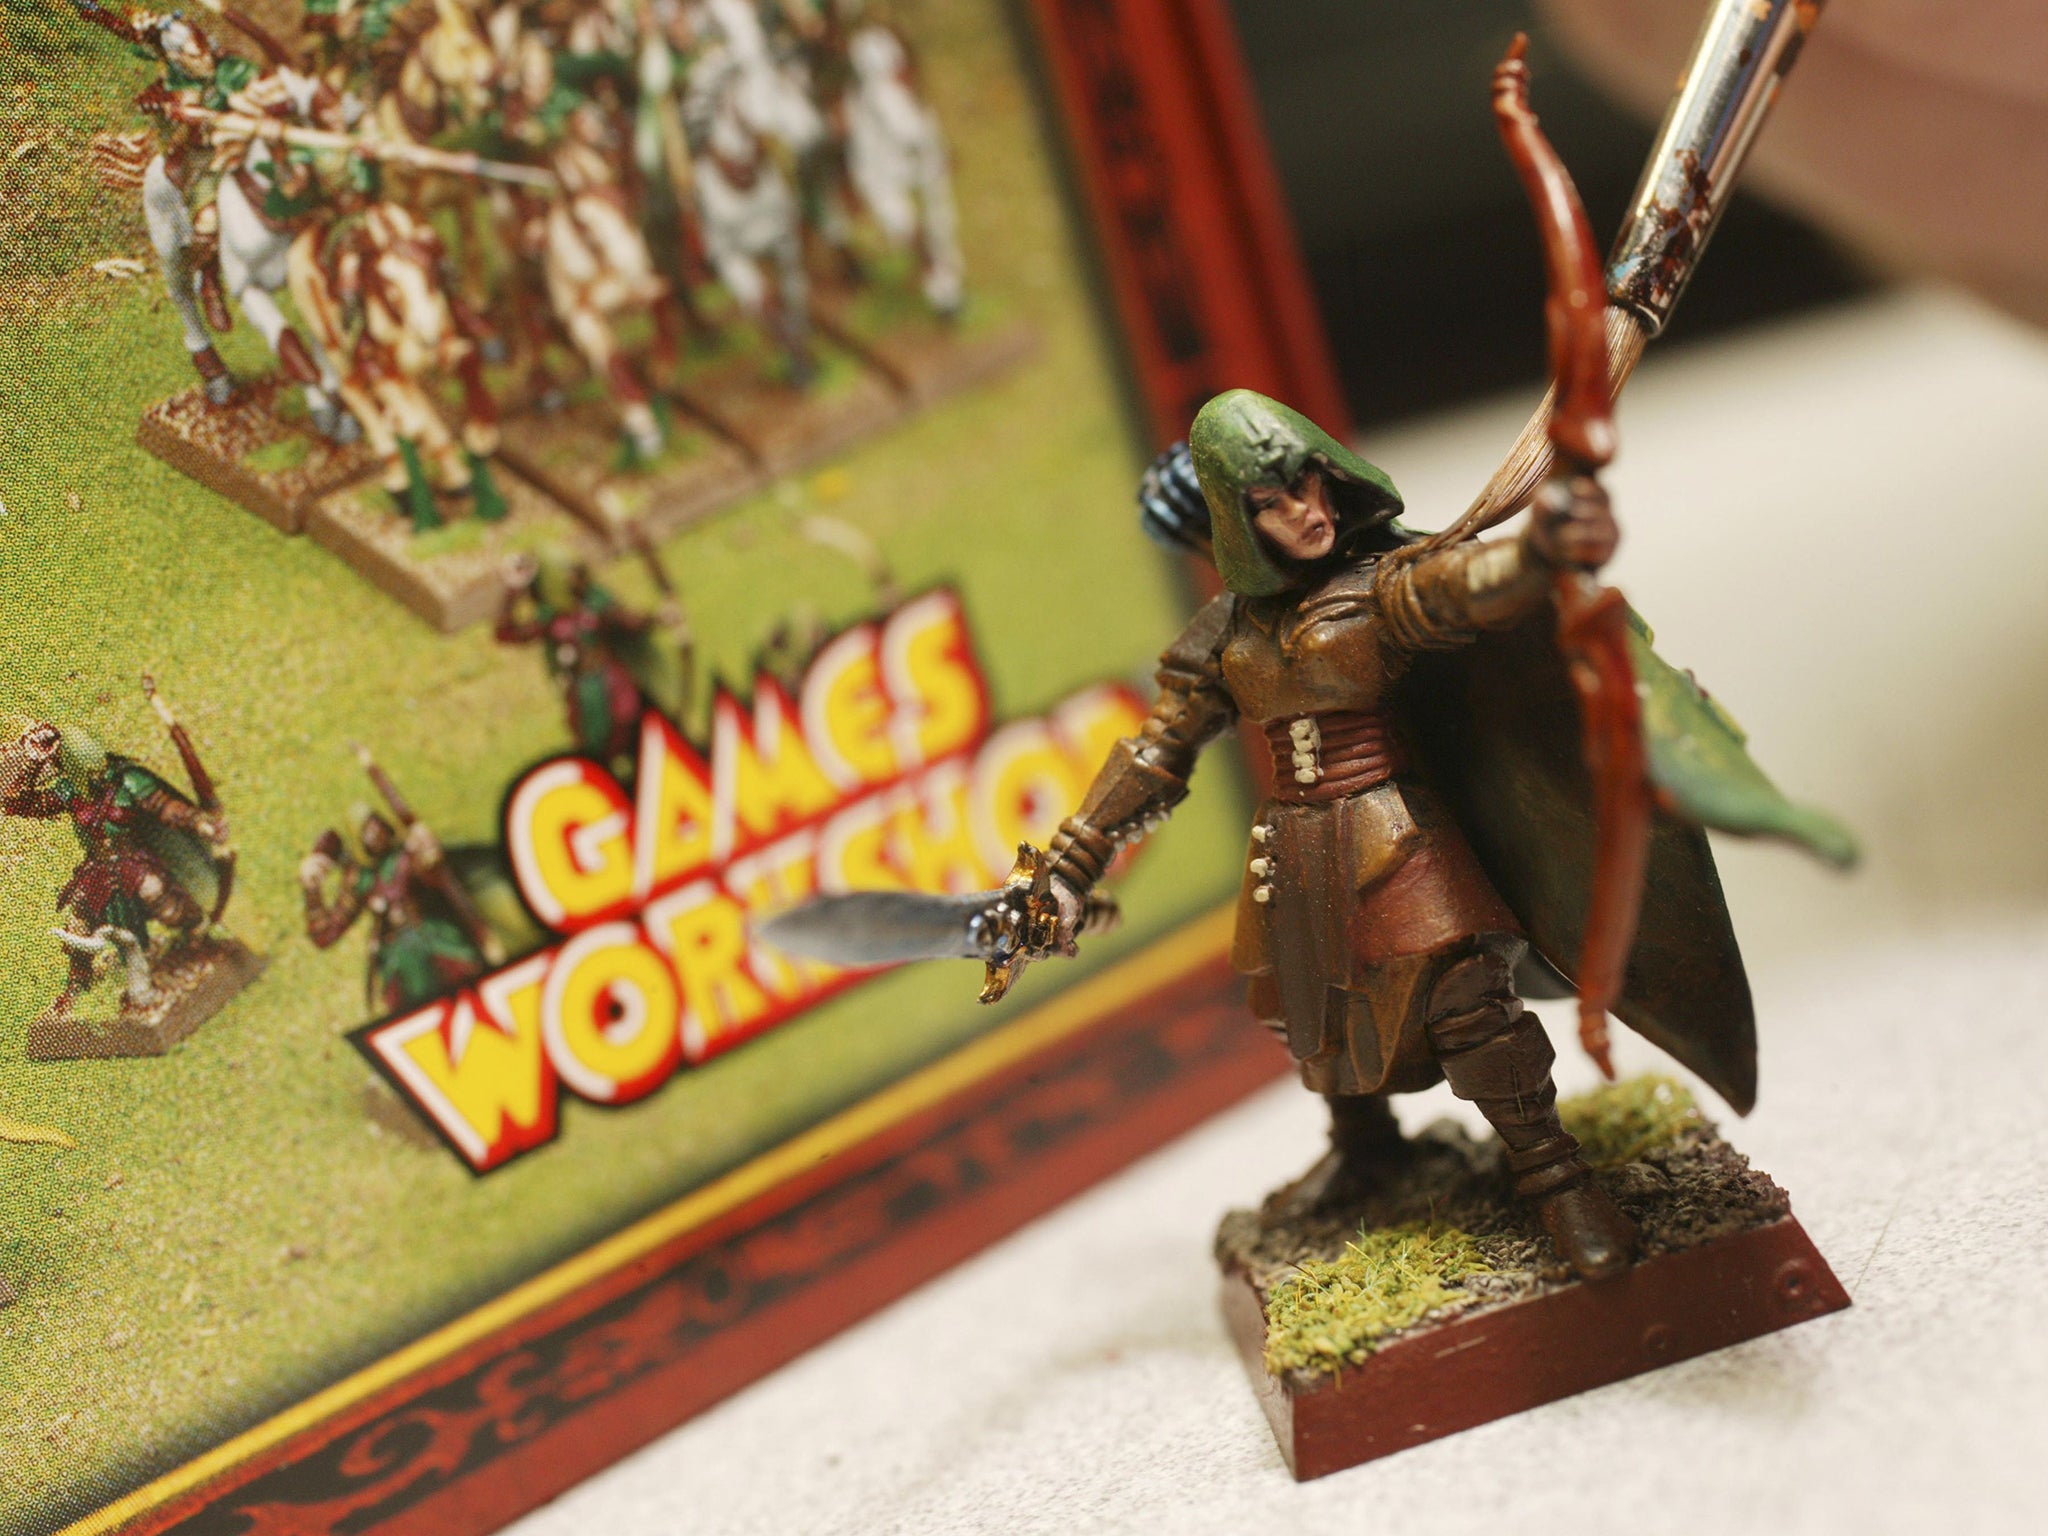 Tabletop games such as Warhammer are among the most popular buys